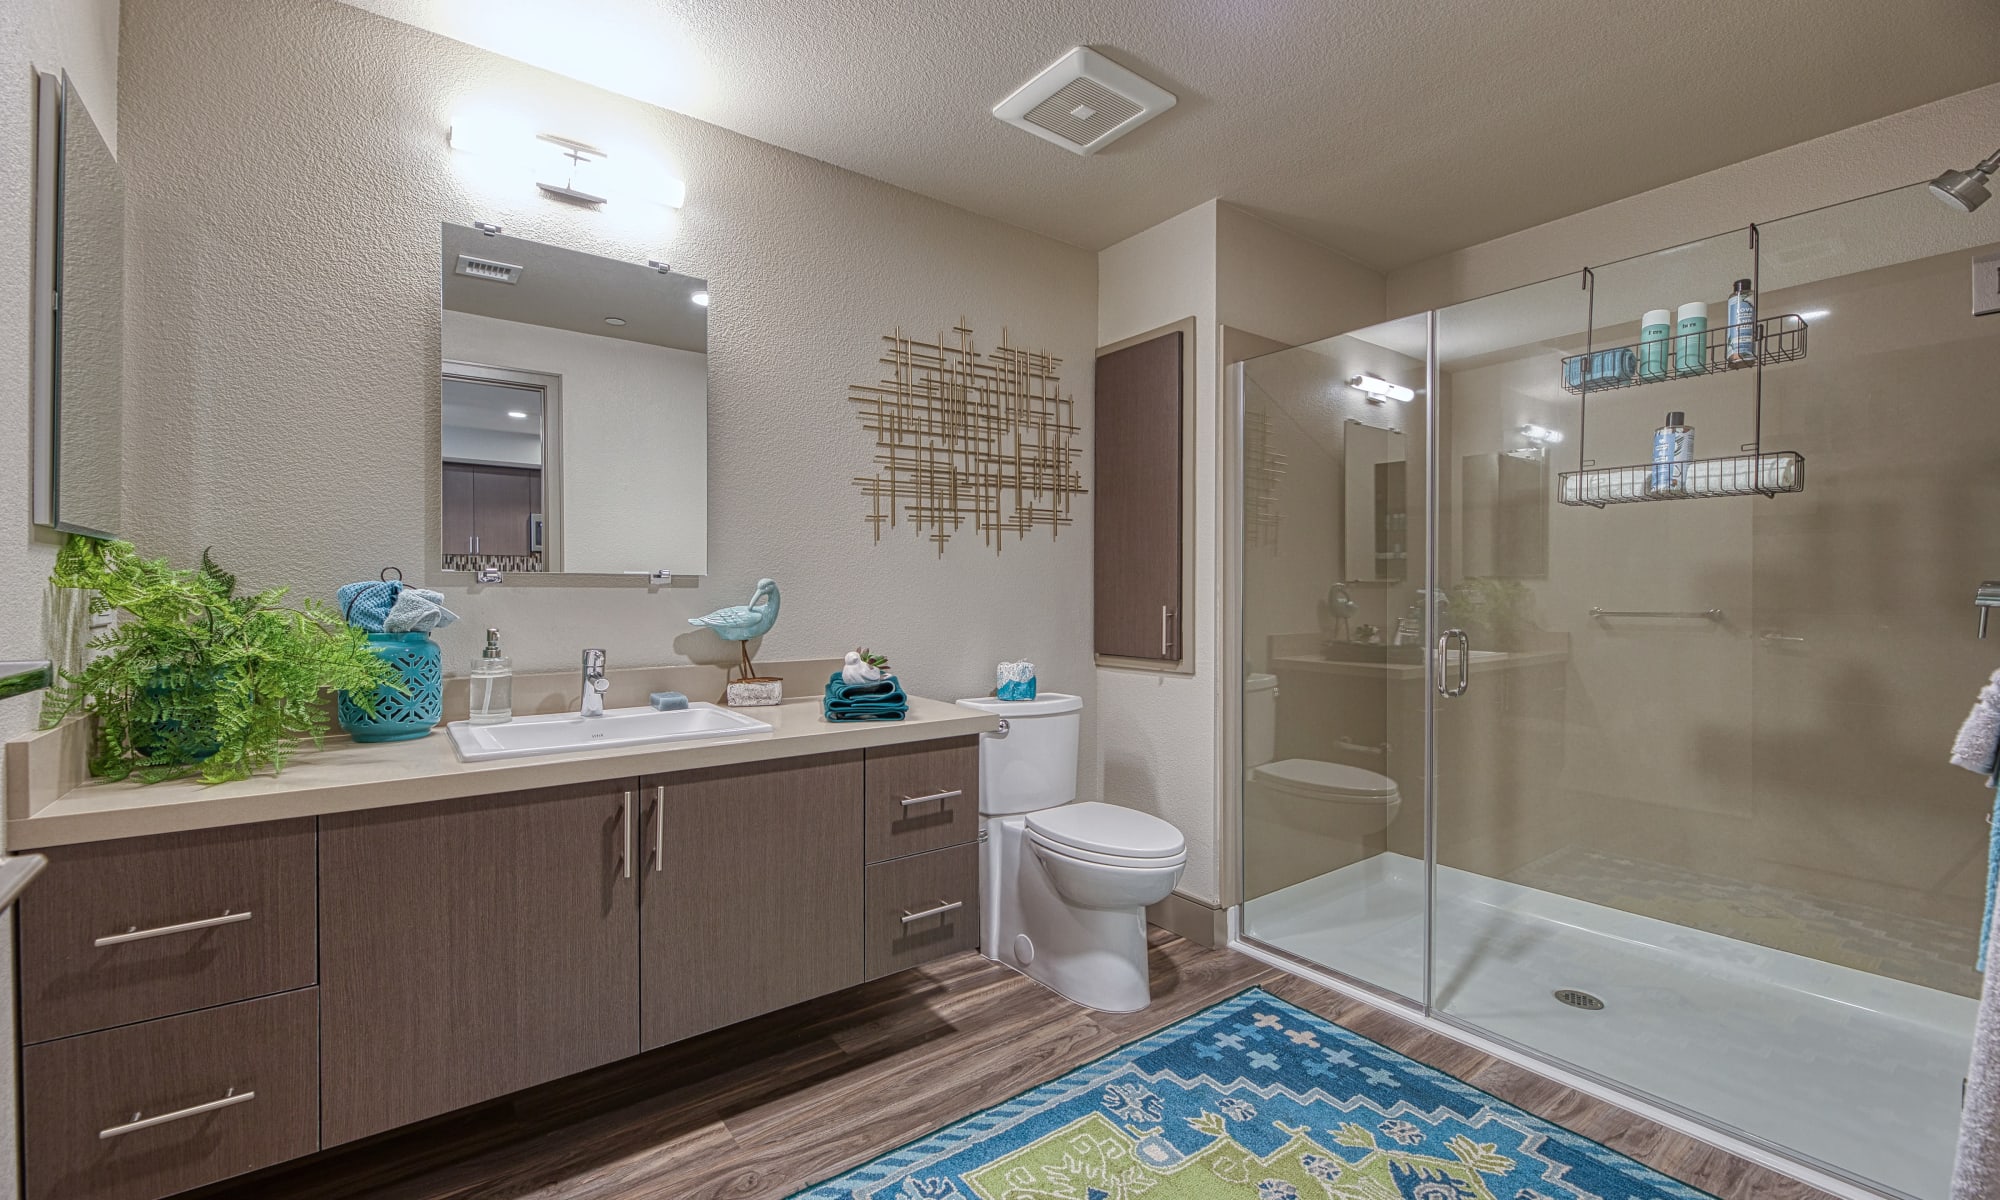 Vespaio in San Jose, California features a bathroom with glass doored shower.